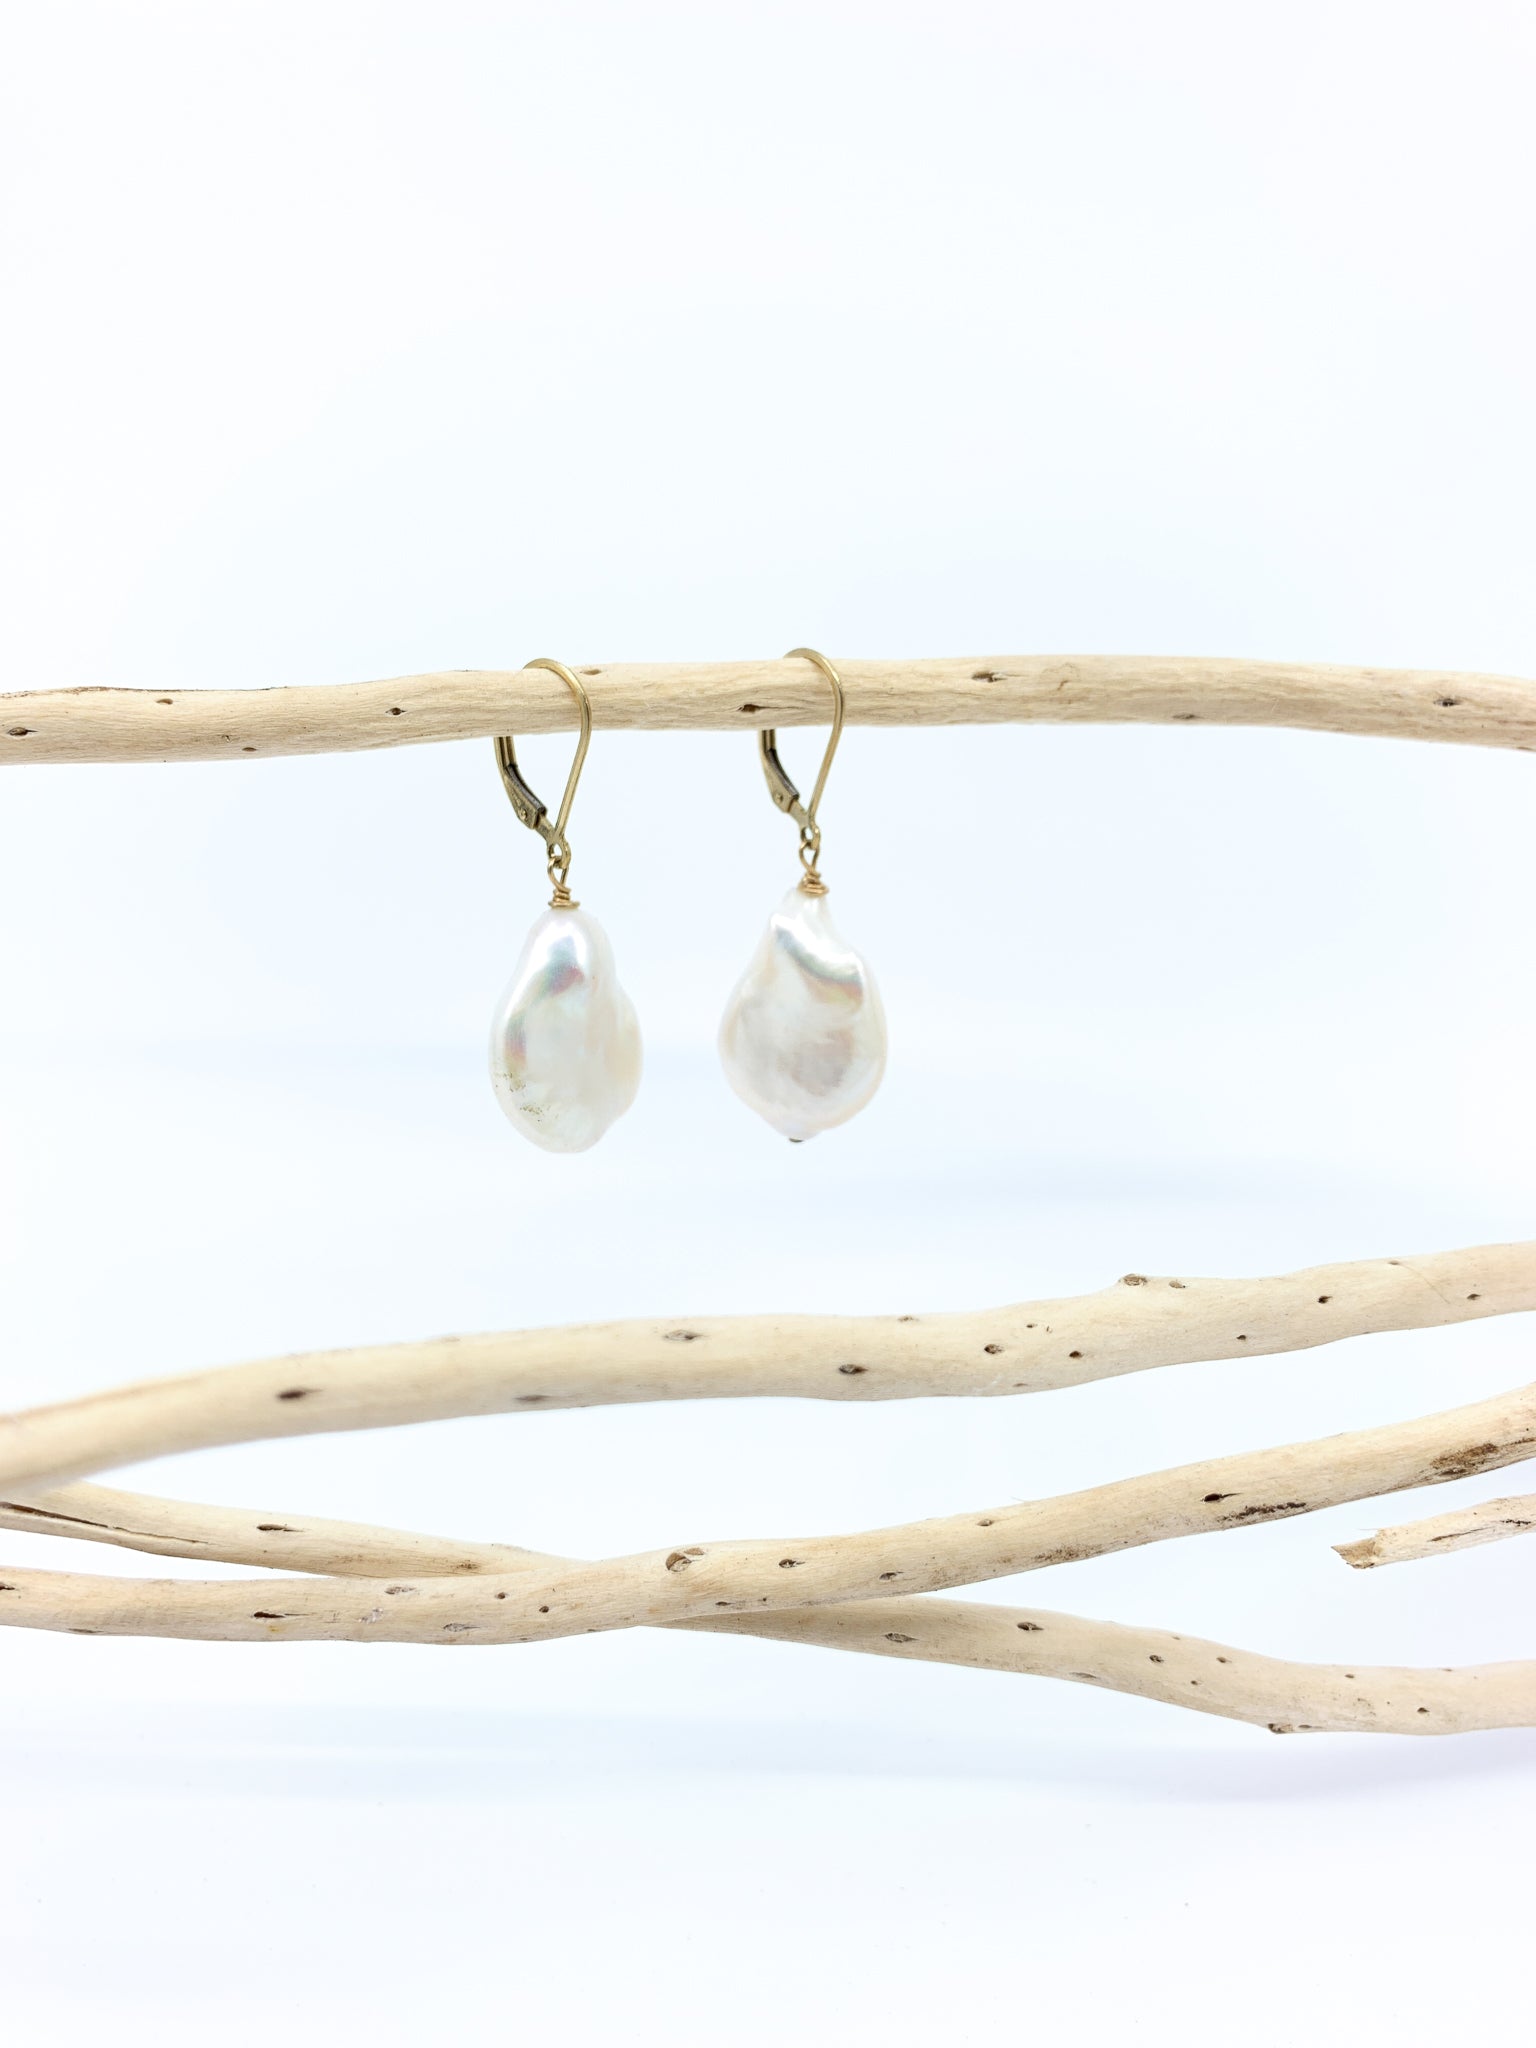 large white baroque pearl earrings with safety ear wires by eve black jewelry made in hawaii